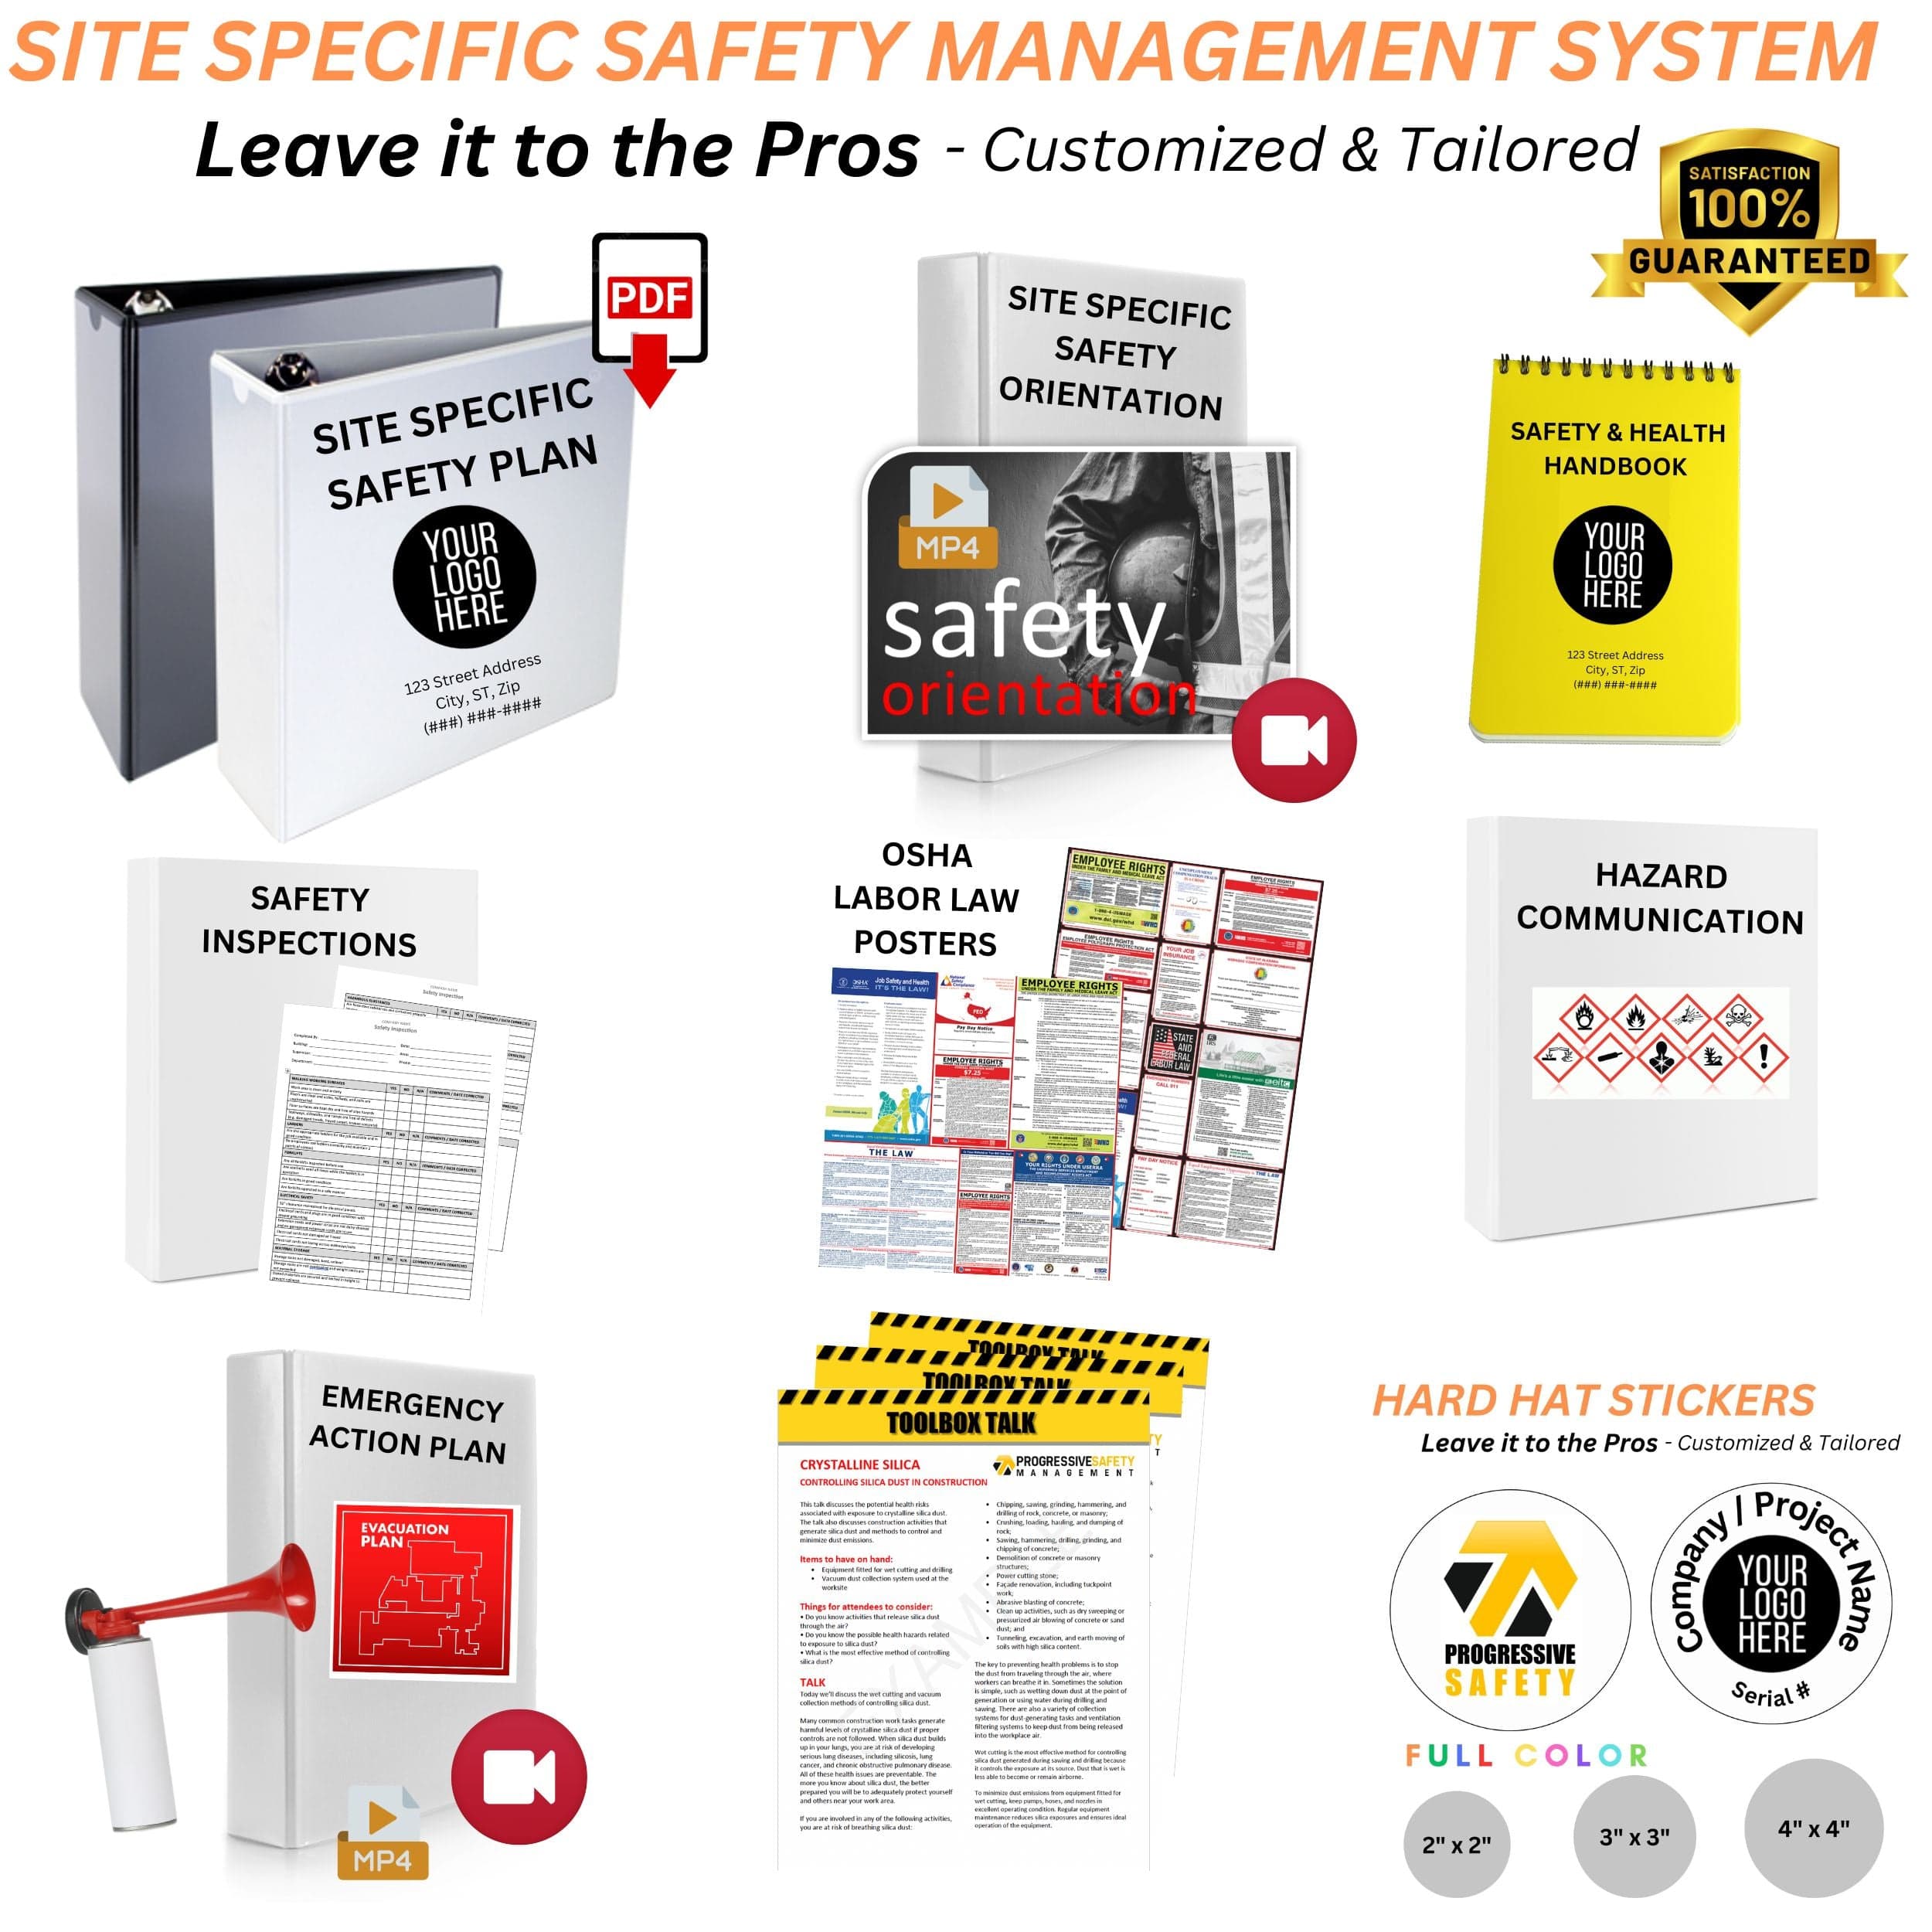 Site Specific Safety Management System - Complete Package